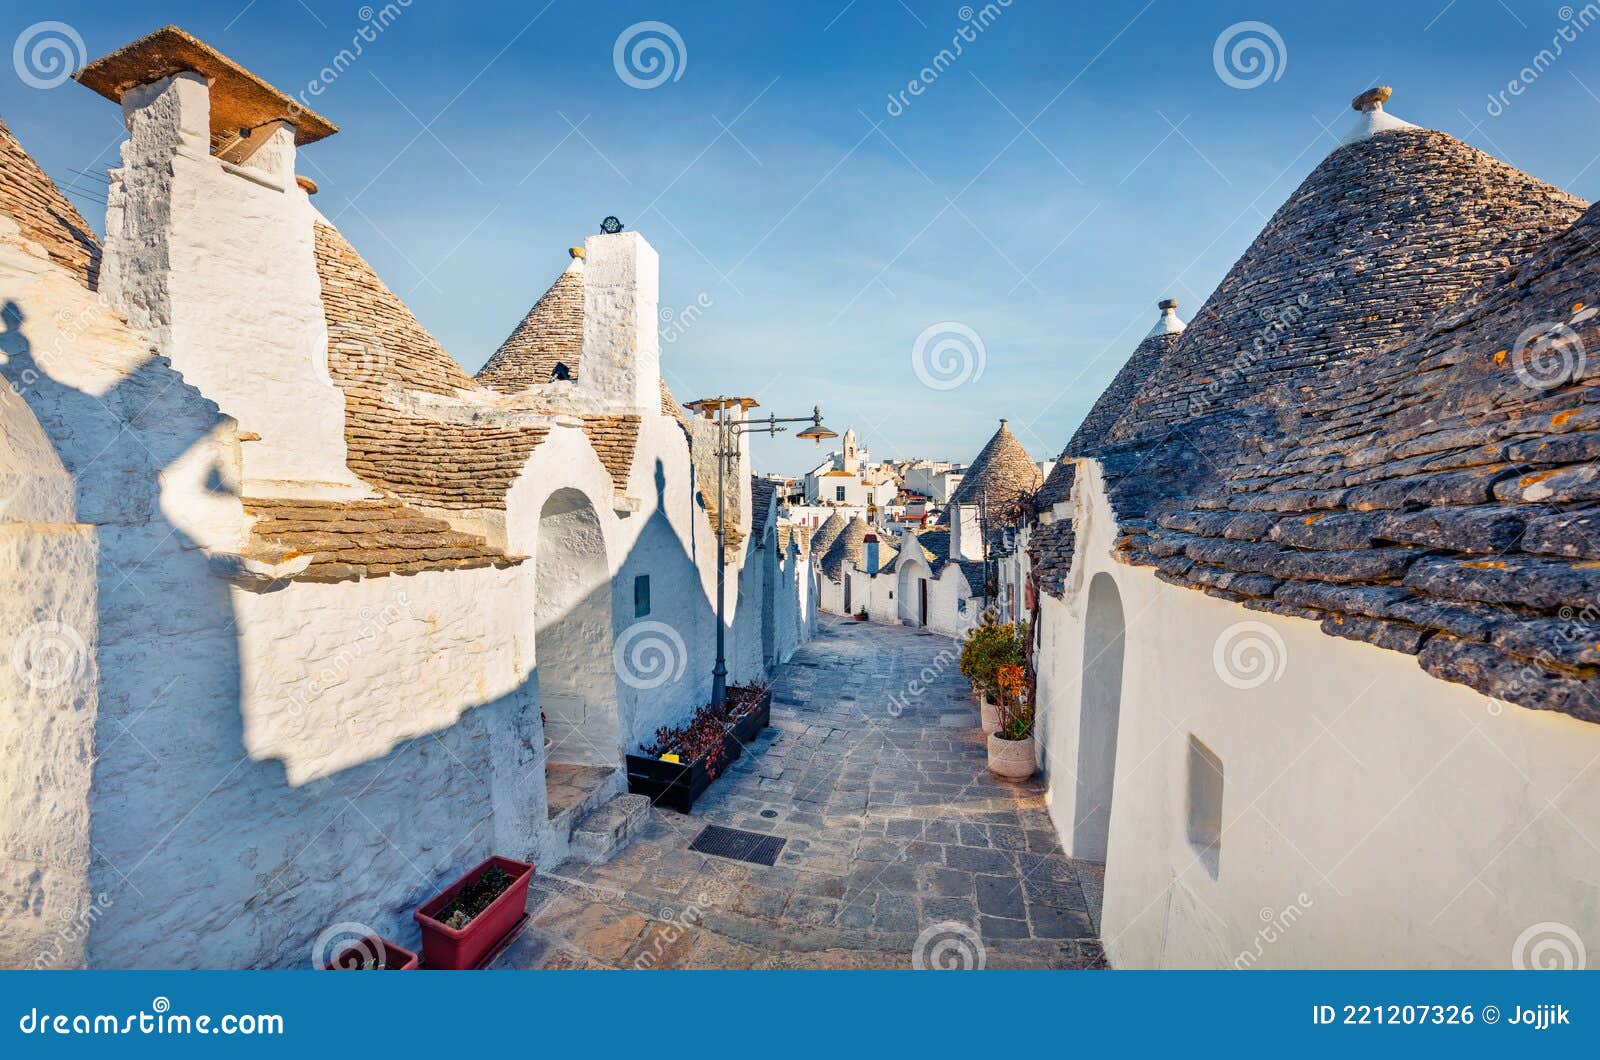 bright morning view of empty strret with trullo trulli -  traditional apulian dry stone hut with a conical roof. amazing summer